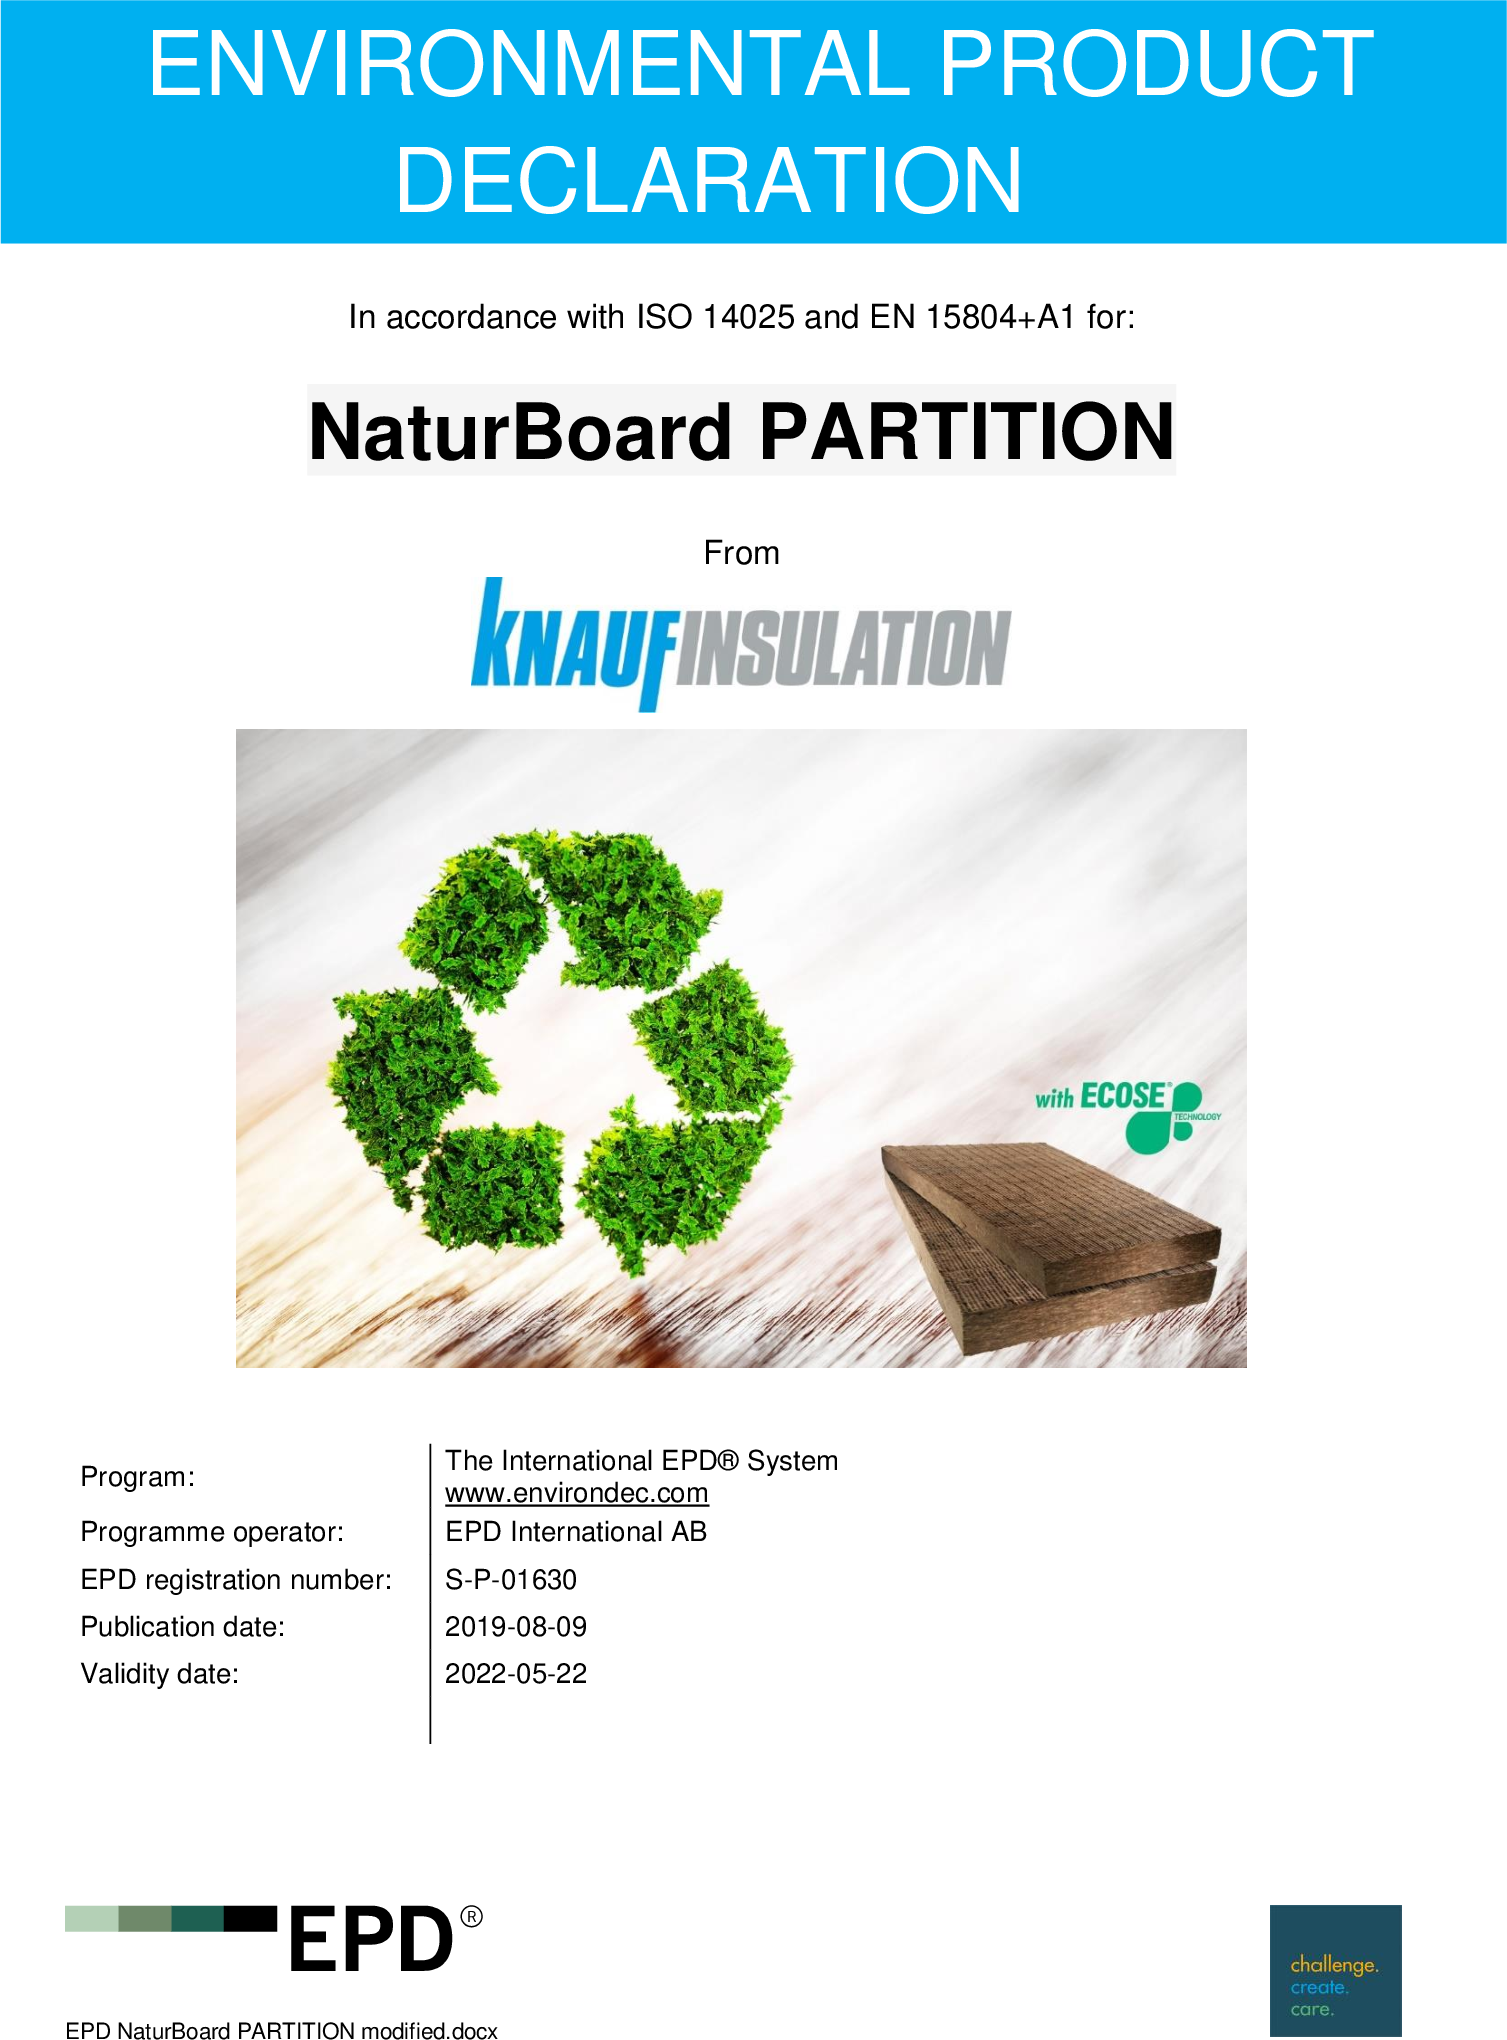 NaturBoard PARTITION